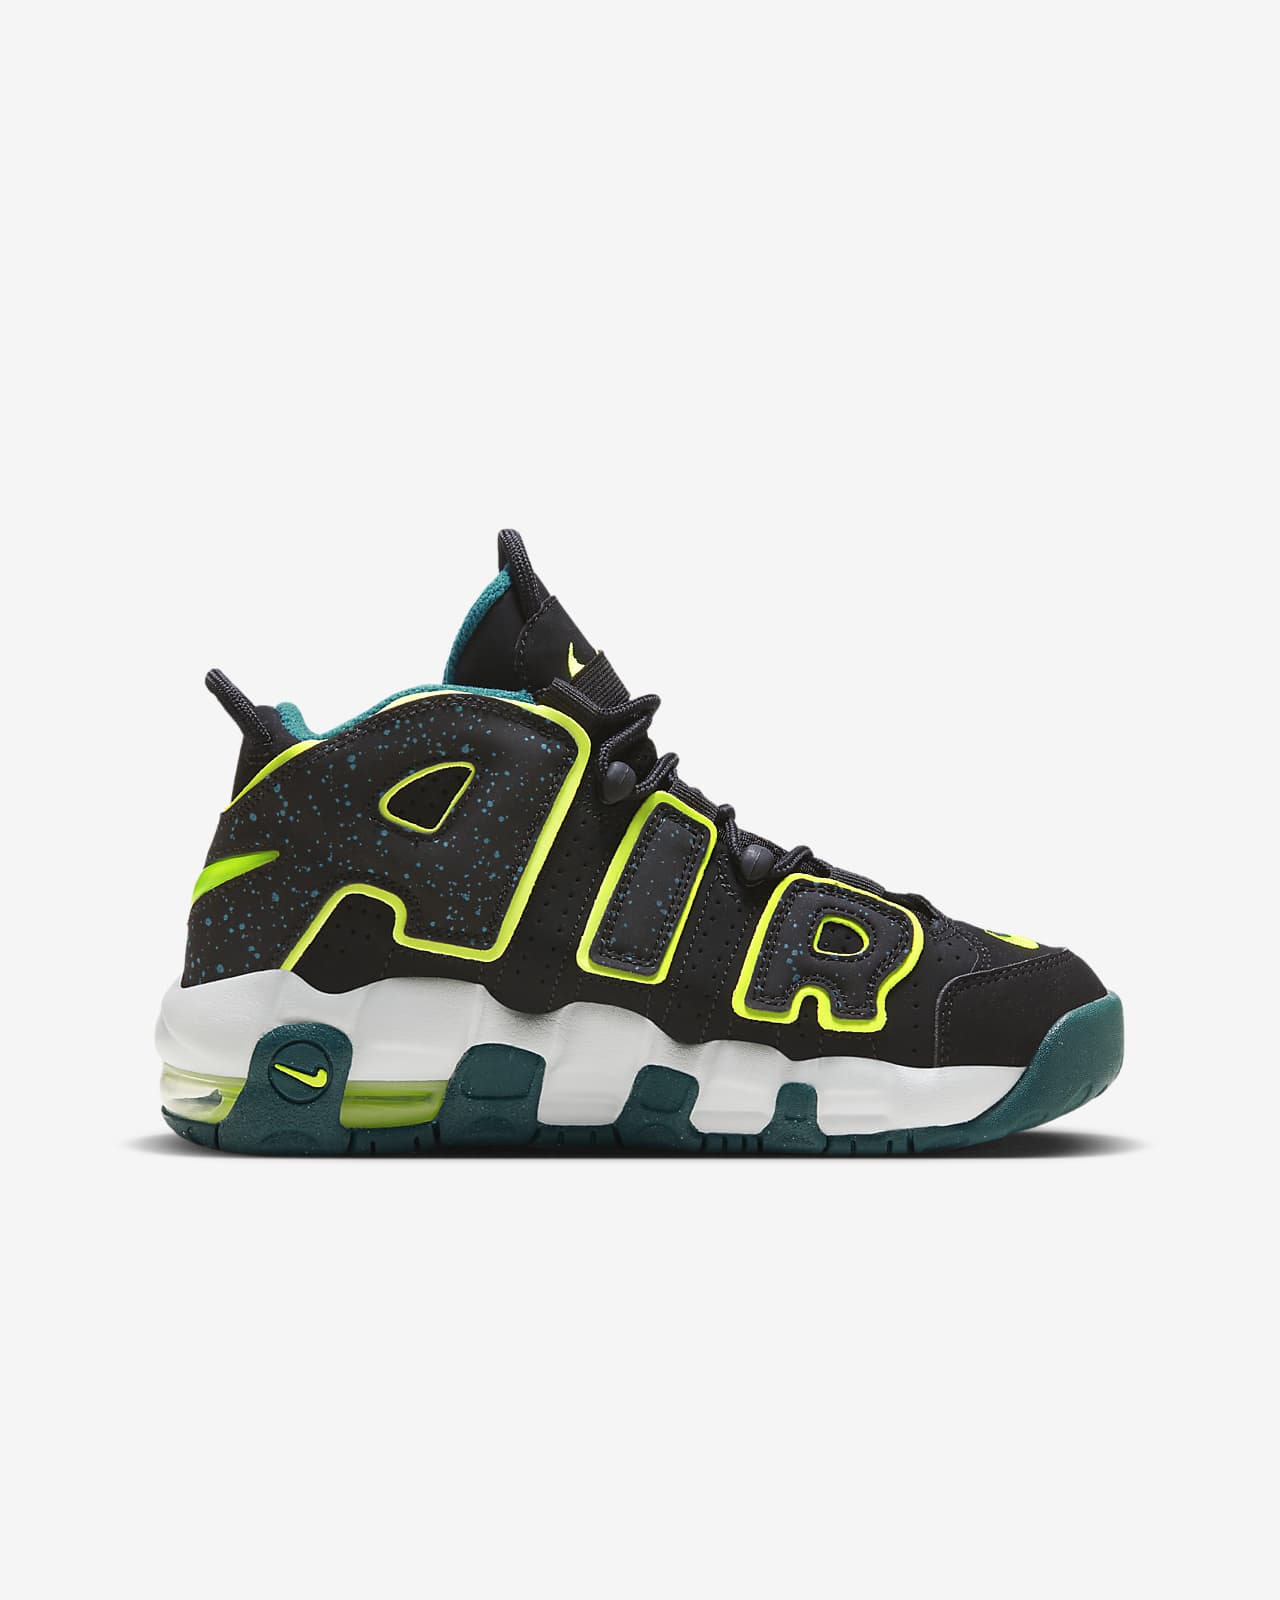 This Nike Air More Uptempo Brightens Things Up! - Sneaker Freaker